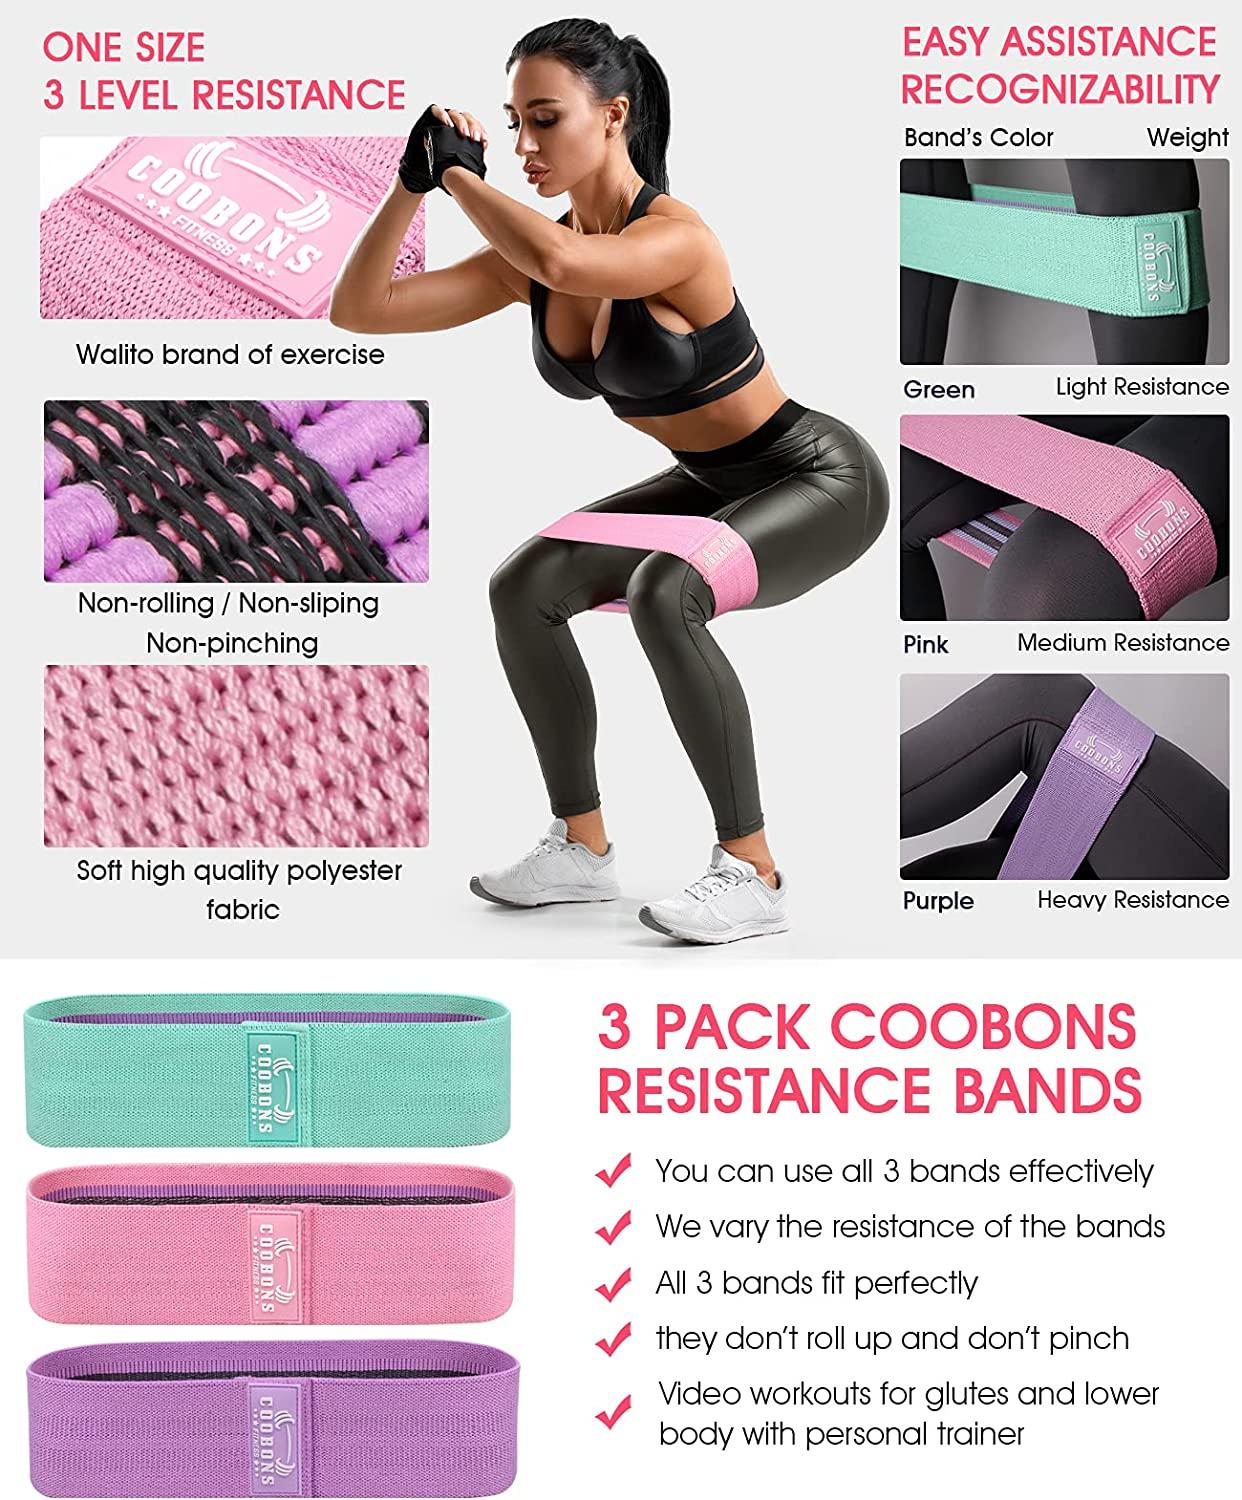 Resistance Bands Set - Booty & Legs Exercise Bands, Anti-Slip Fabric  Stretch Bands, Workout Bands for Women/Men, Working Out, Hip Circle Lift,  Thigh, Squat, Yoga, at Home Fitness or Gym - 3